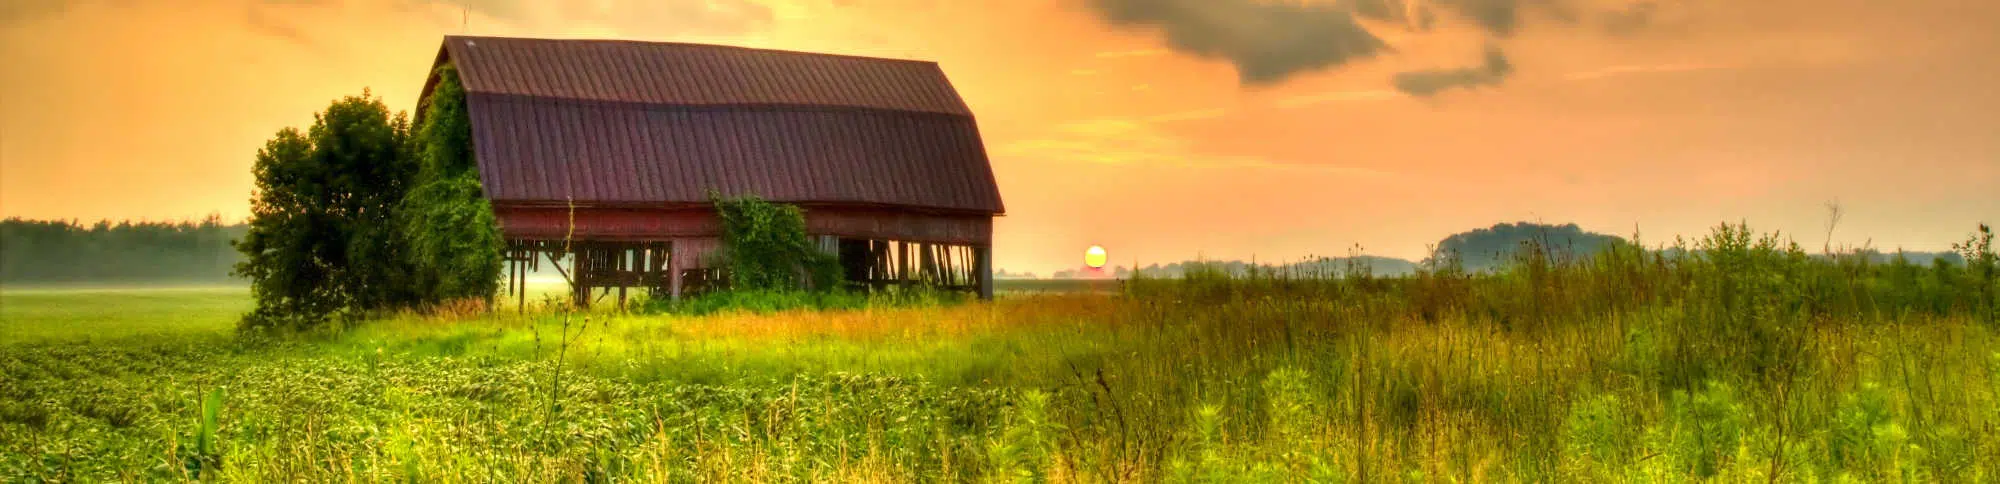 image of countryside in Iowa with old barn